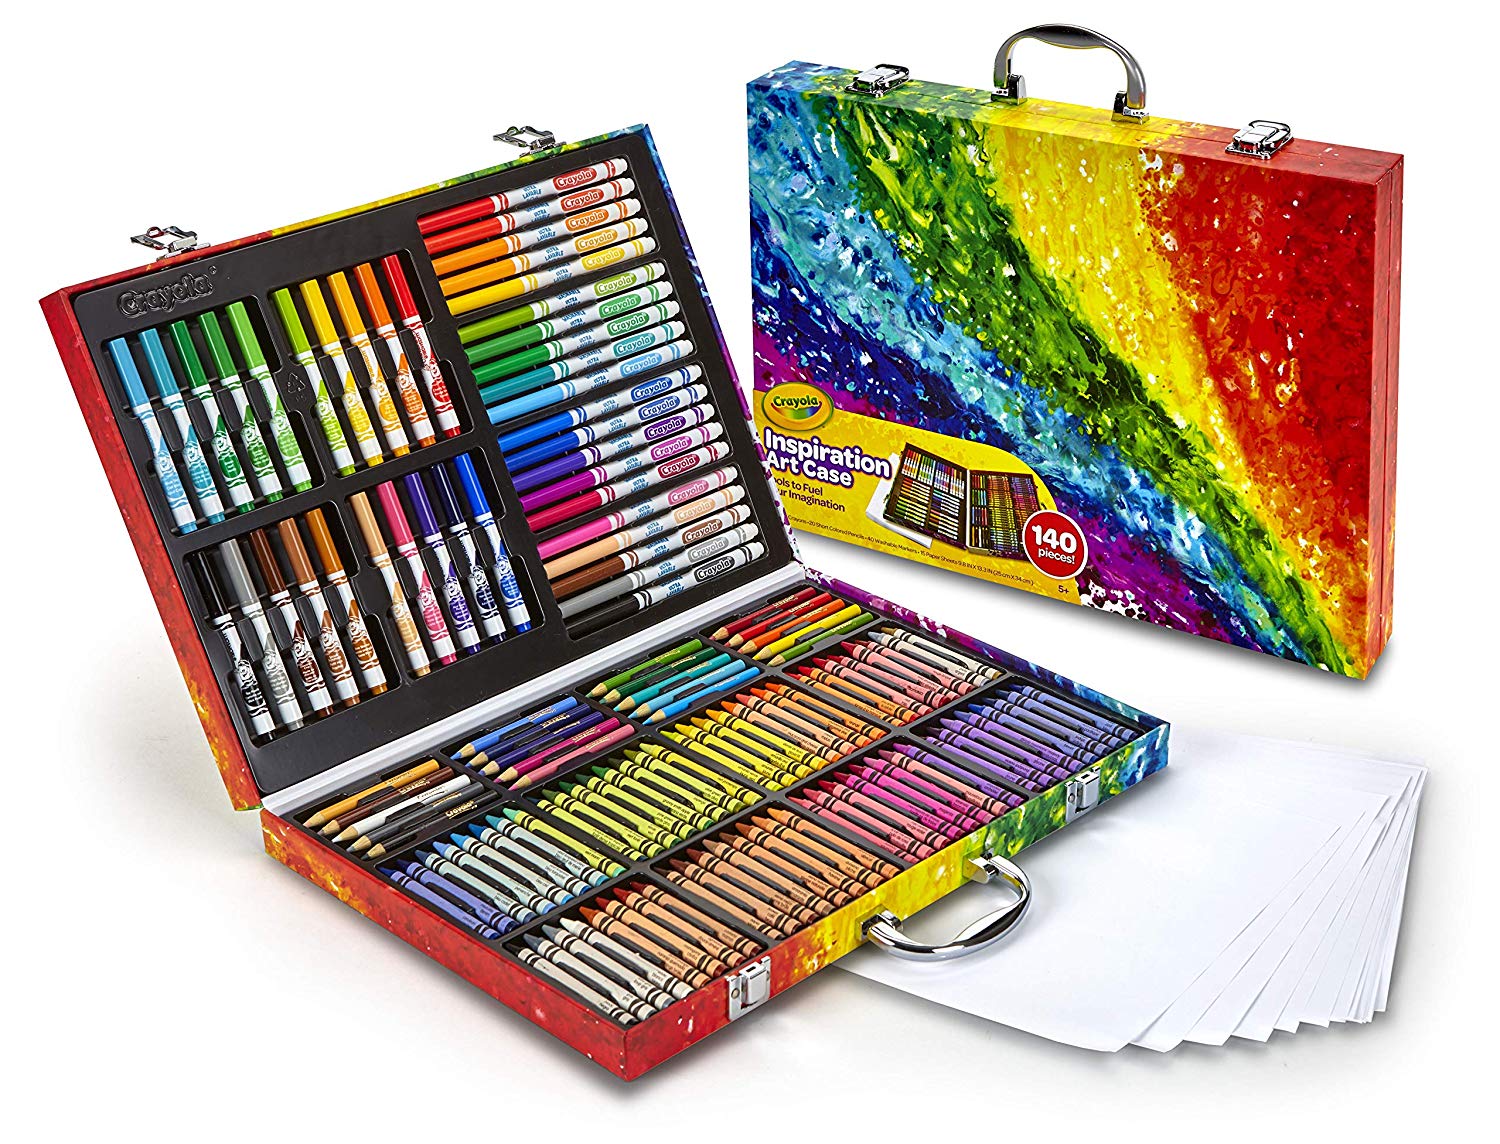 Crayola Inspiration Art Case Only $15.90! - Become a Coupon Queen1500 x 1144